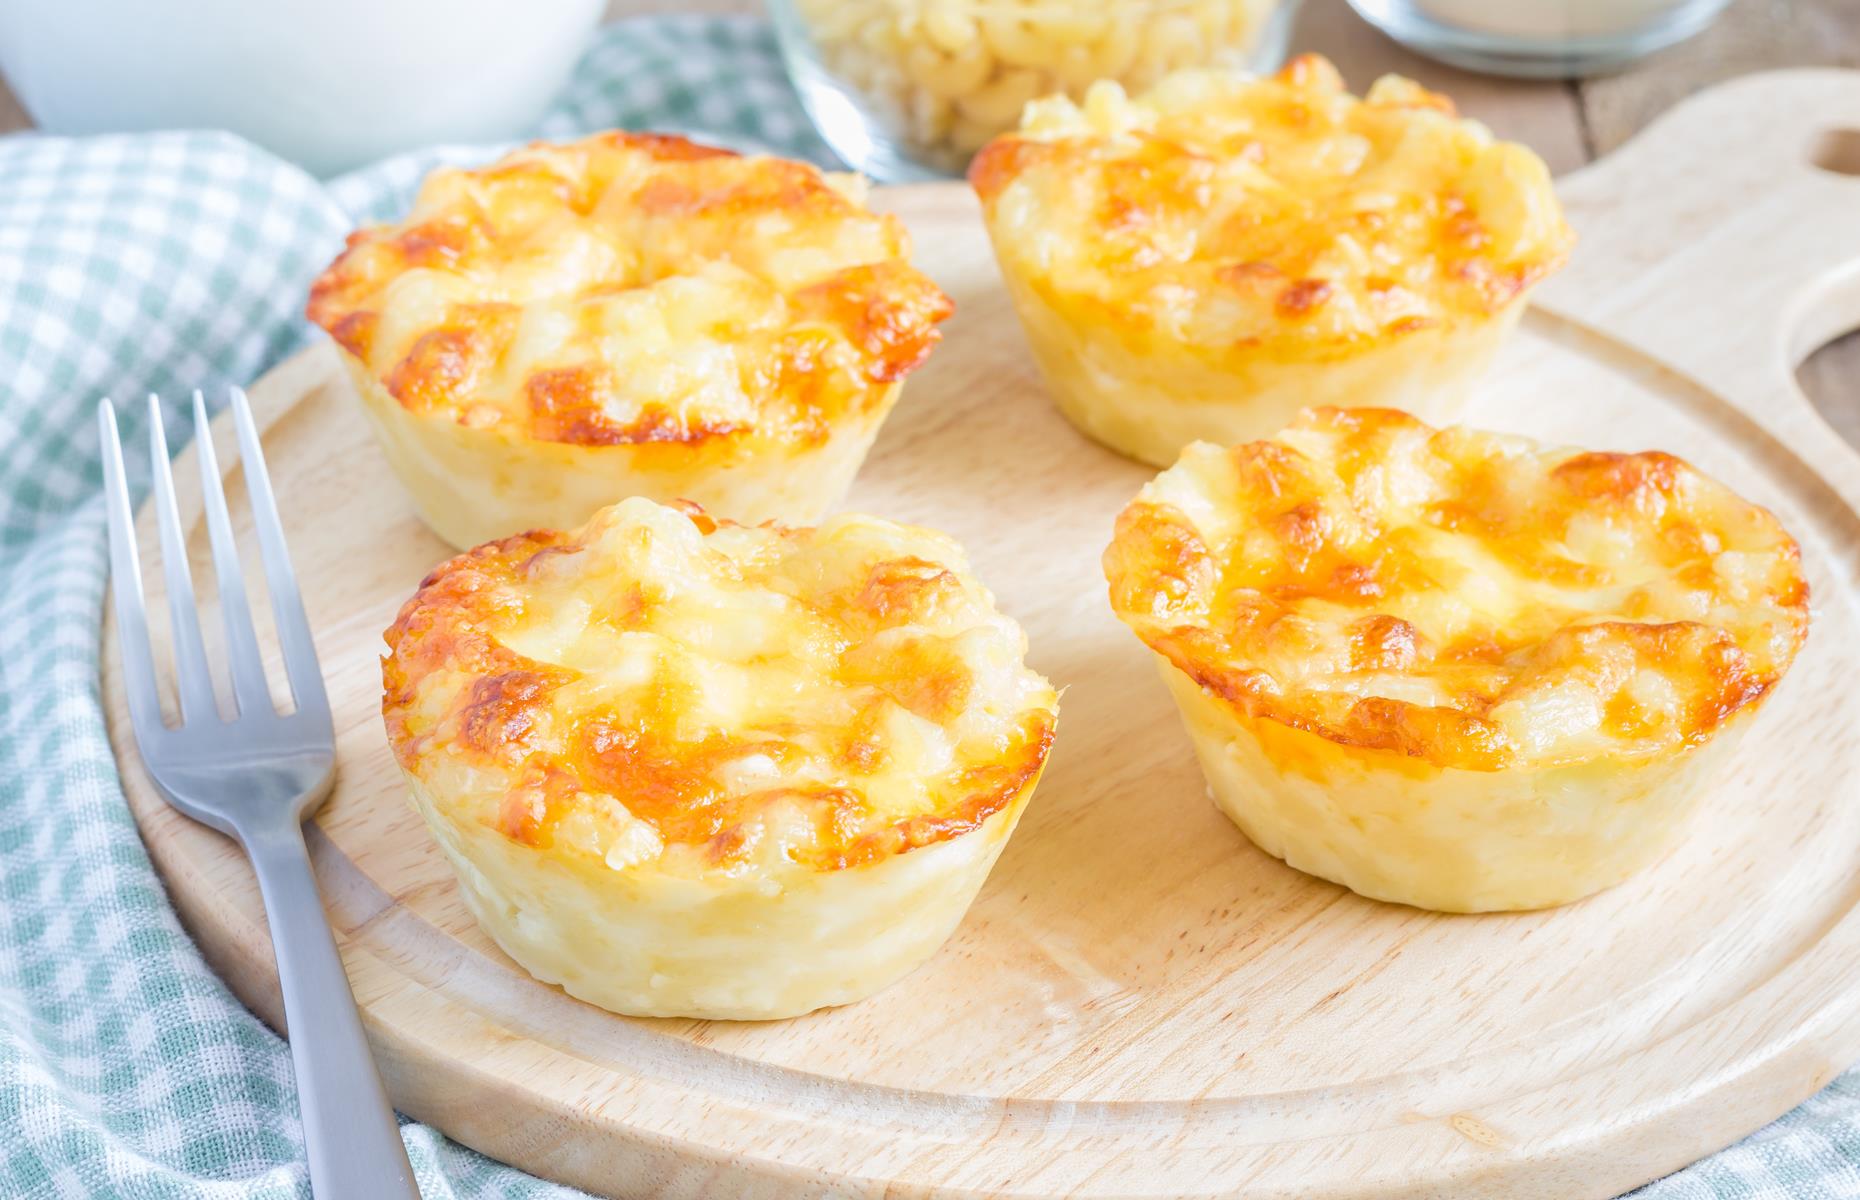 <p>Dollop cold leftover mac 'n' cheese into individual, oiled muffin tin compartments and bake at 350°F (180°C) for around 20 minutes. The little pasta pies can be eaten with a salad or in a packed lunch.</p>  <p><a href="https://www.lovefood.com/galleries/89759/easy-pasta-recipes-for-cosy-dinners?page=1"><strong>Take a look at 33 comforting pasta recipes</strong></a></p>